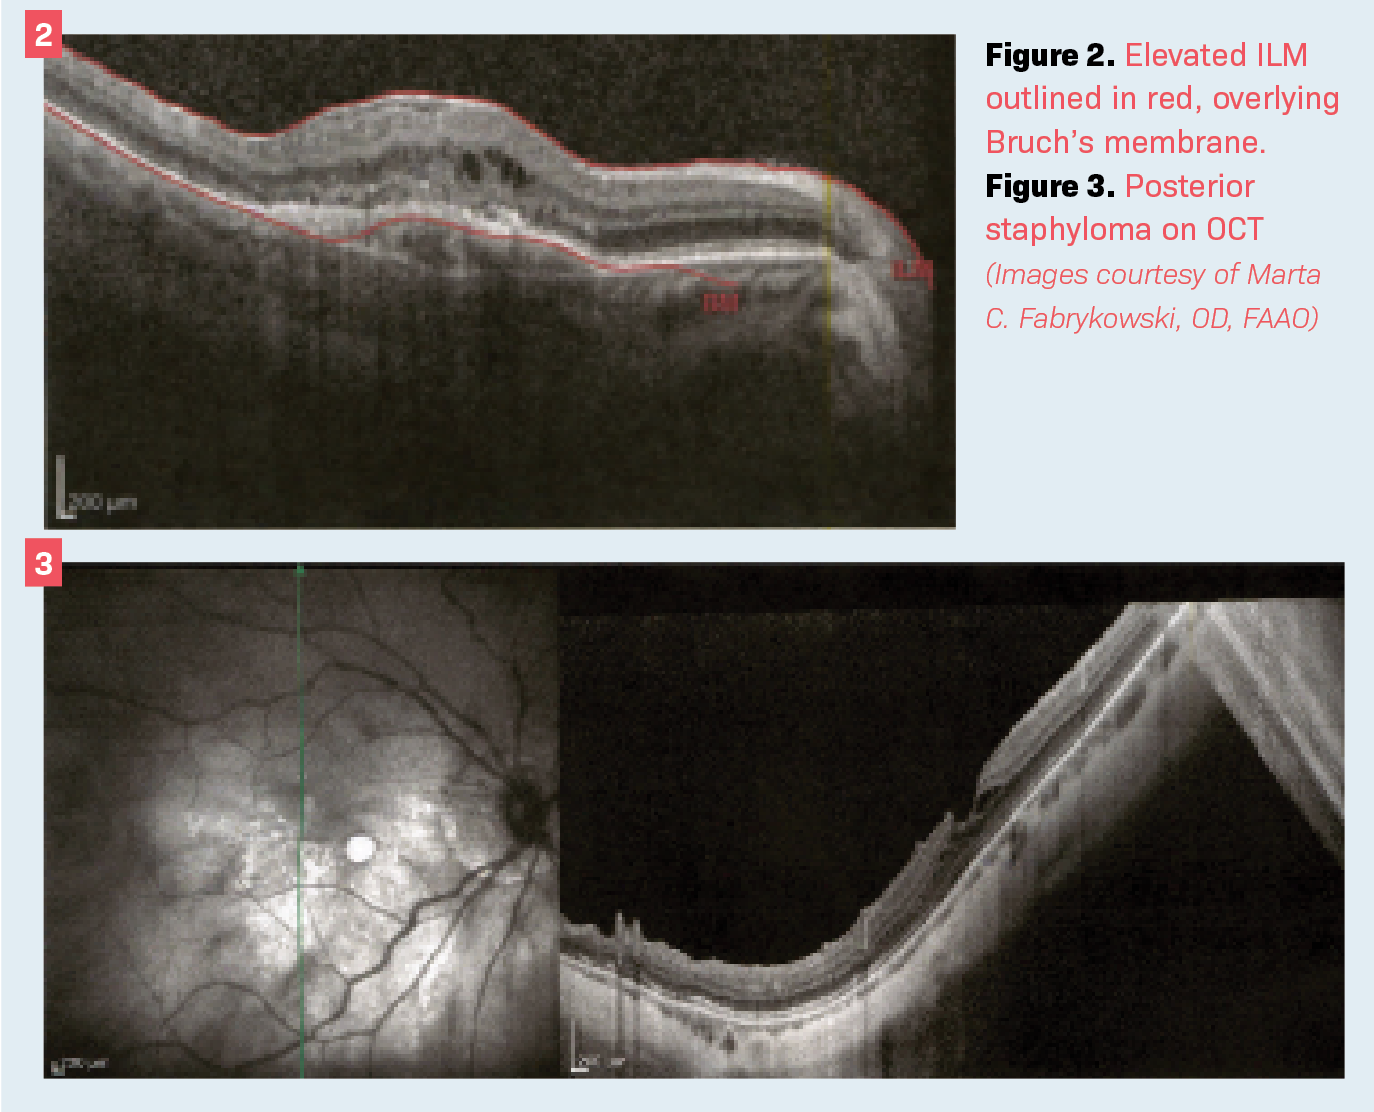 Retinal considerations crucial for accurate biometry